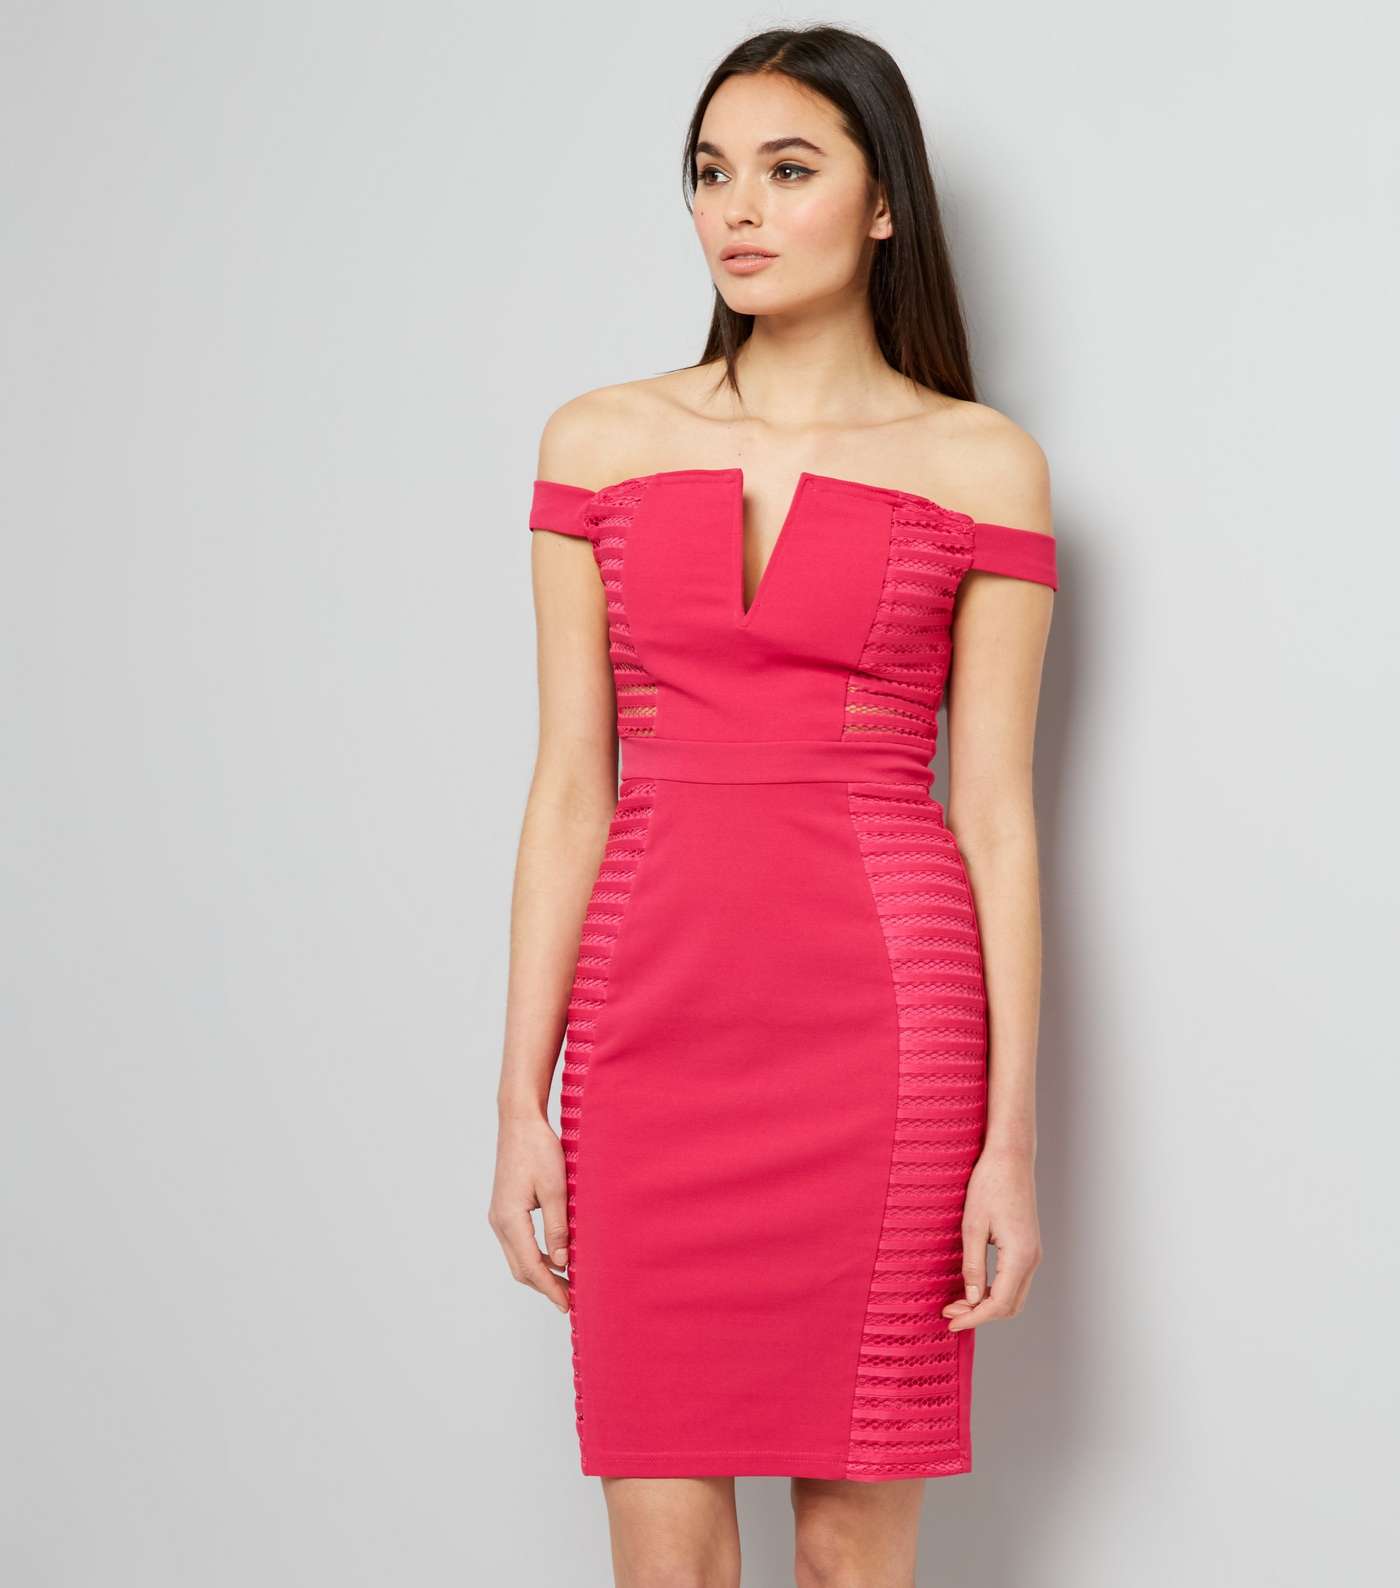 Parisian Bright Pink Cut Out Sides Bodycon Dress 